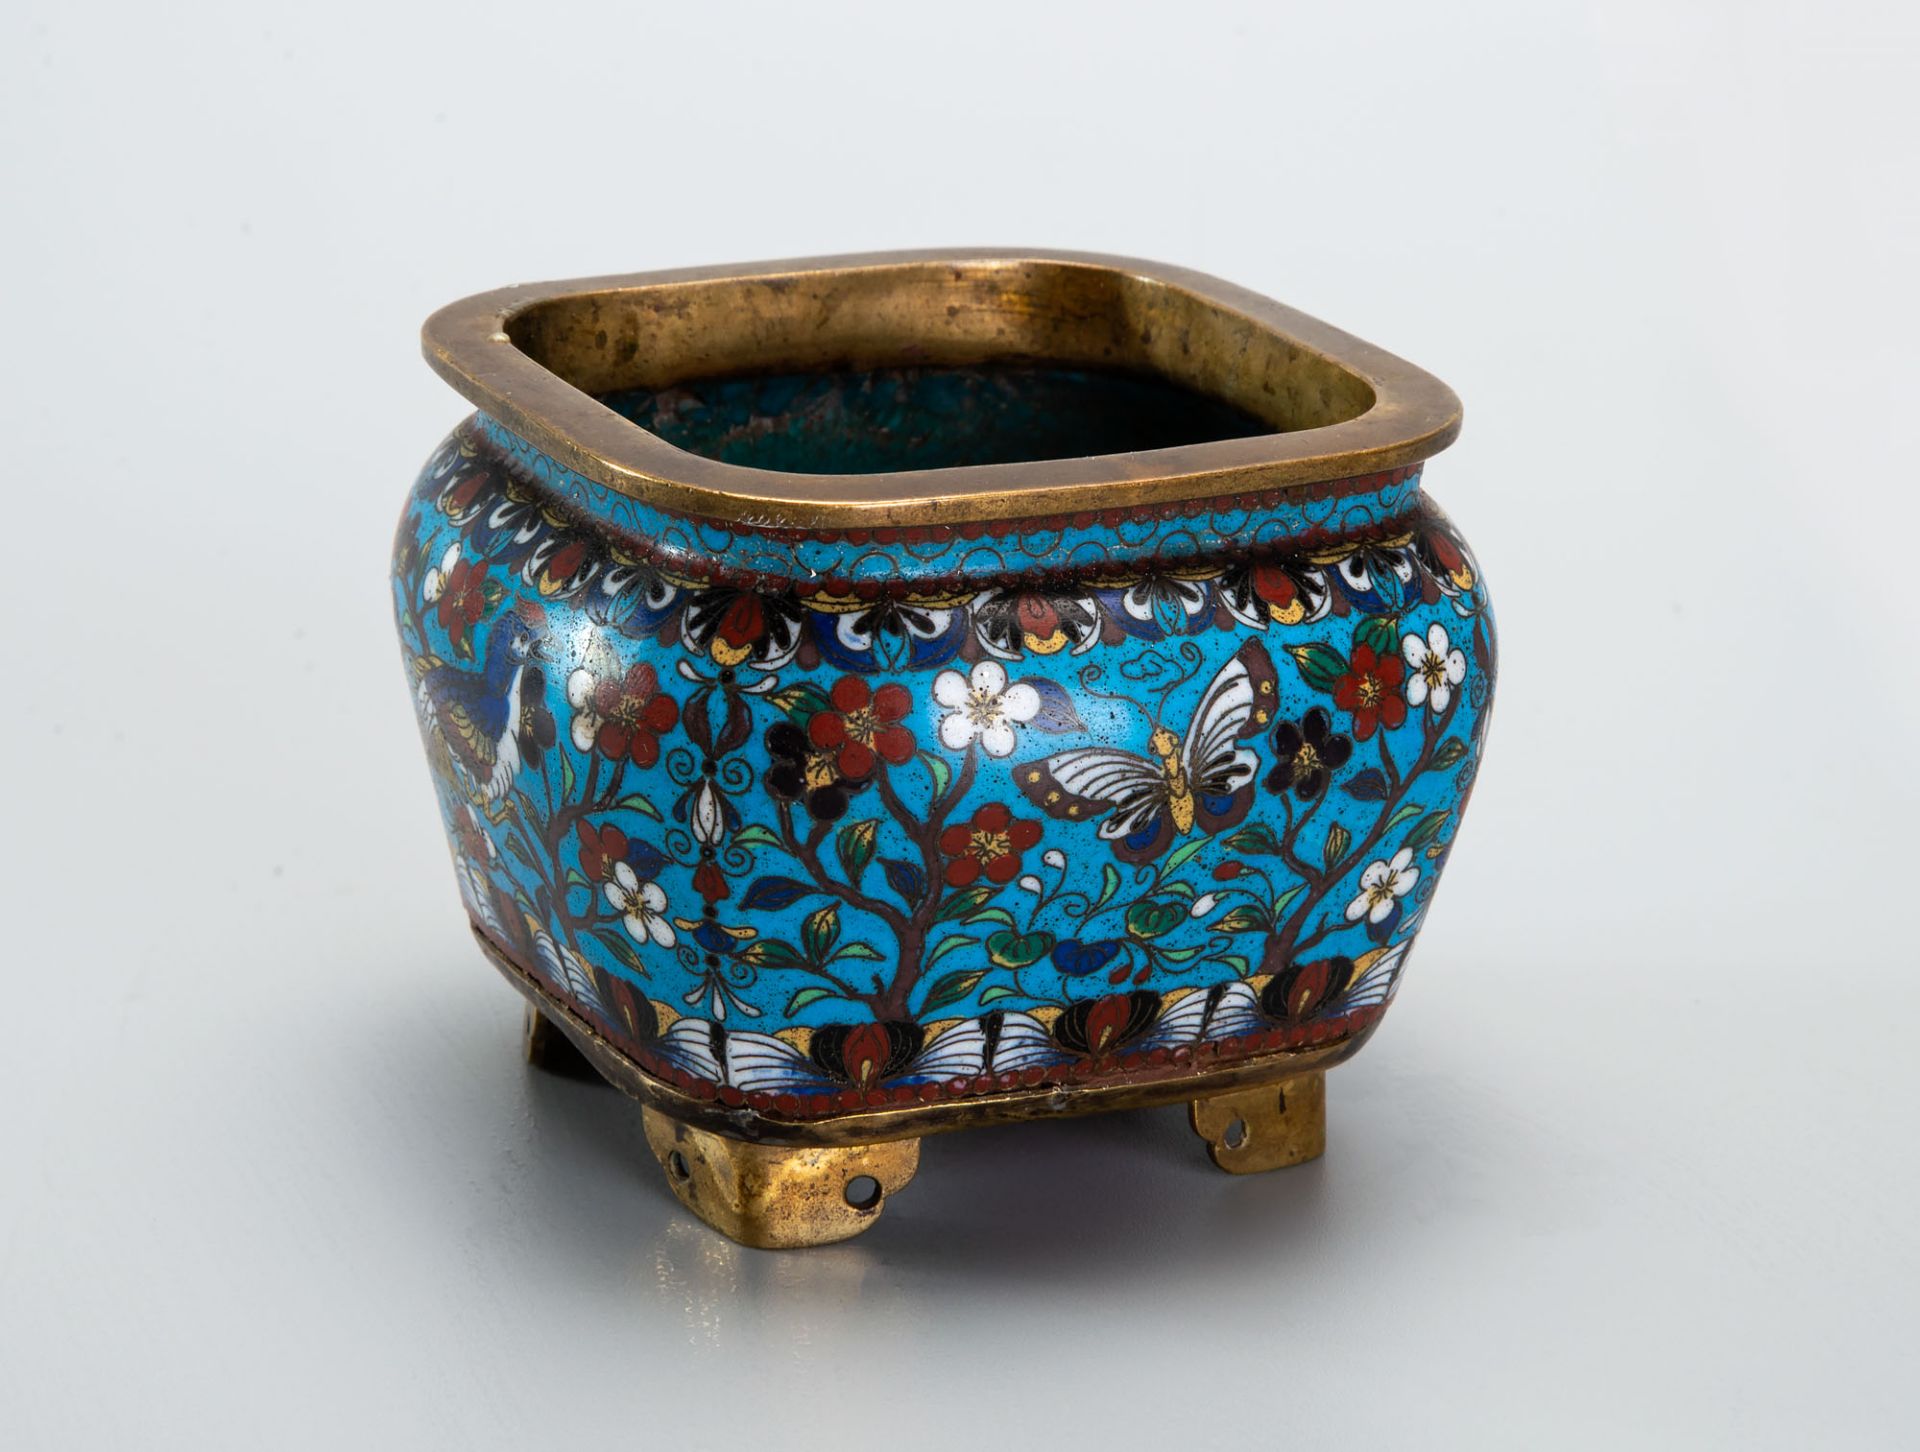 A Fine Cloisonne Incense Burner, China, Qing Dynasty, 18th-19th Century